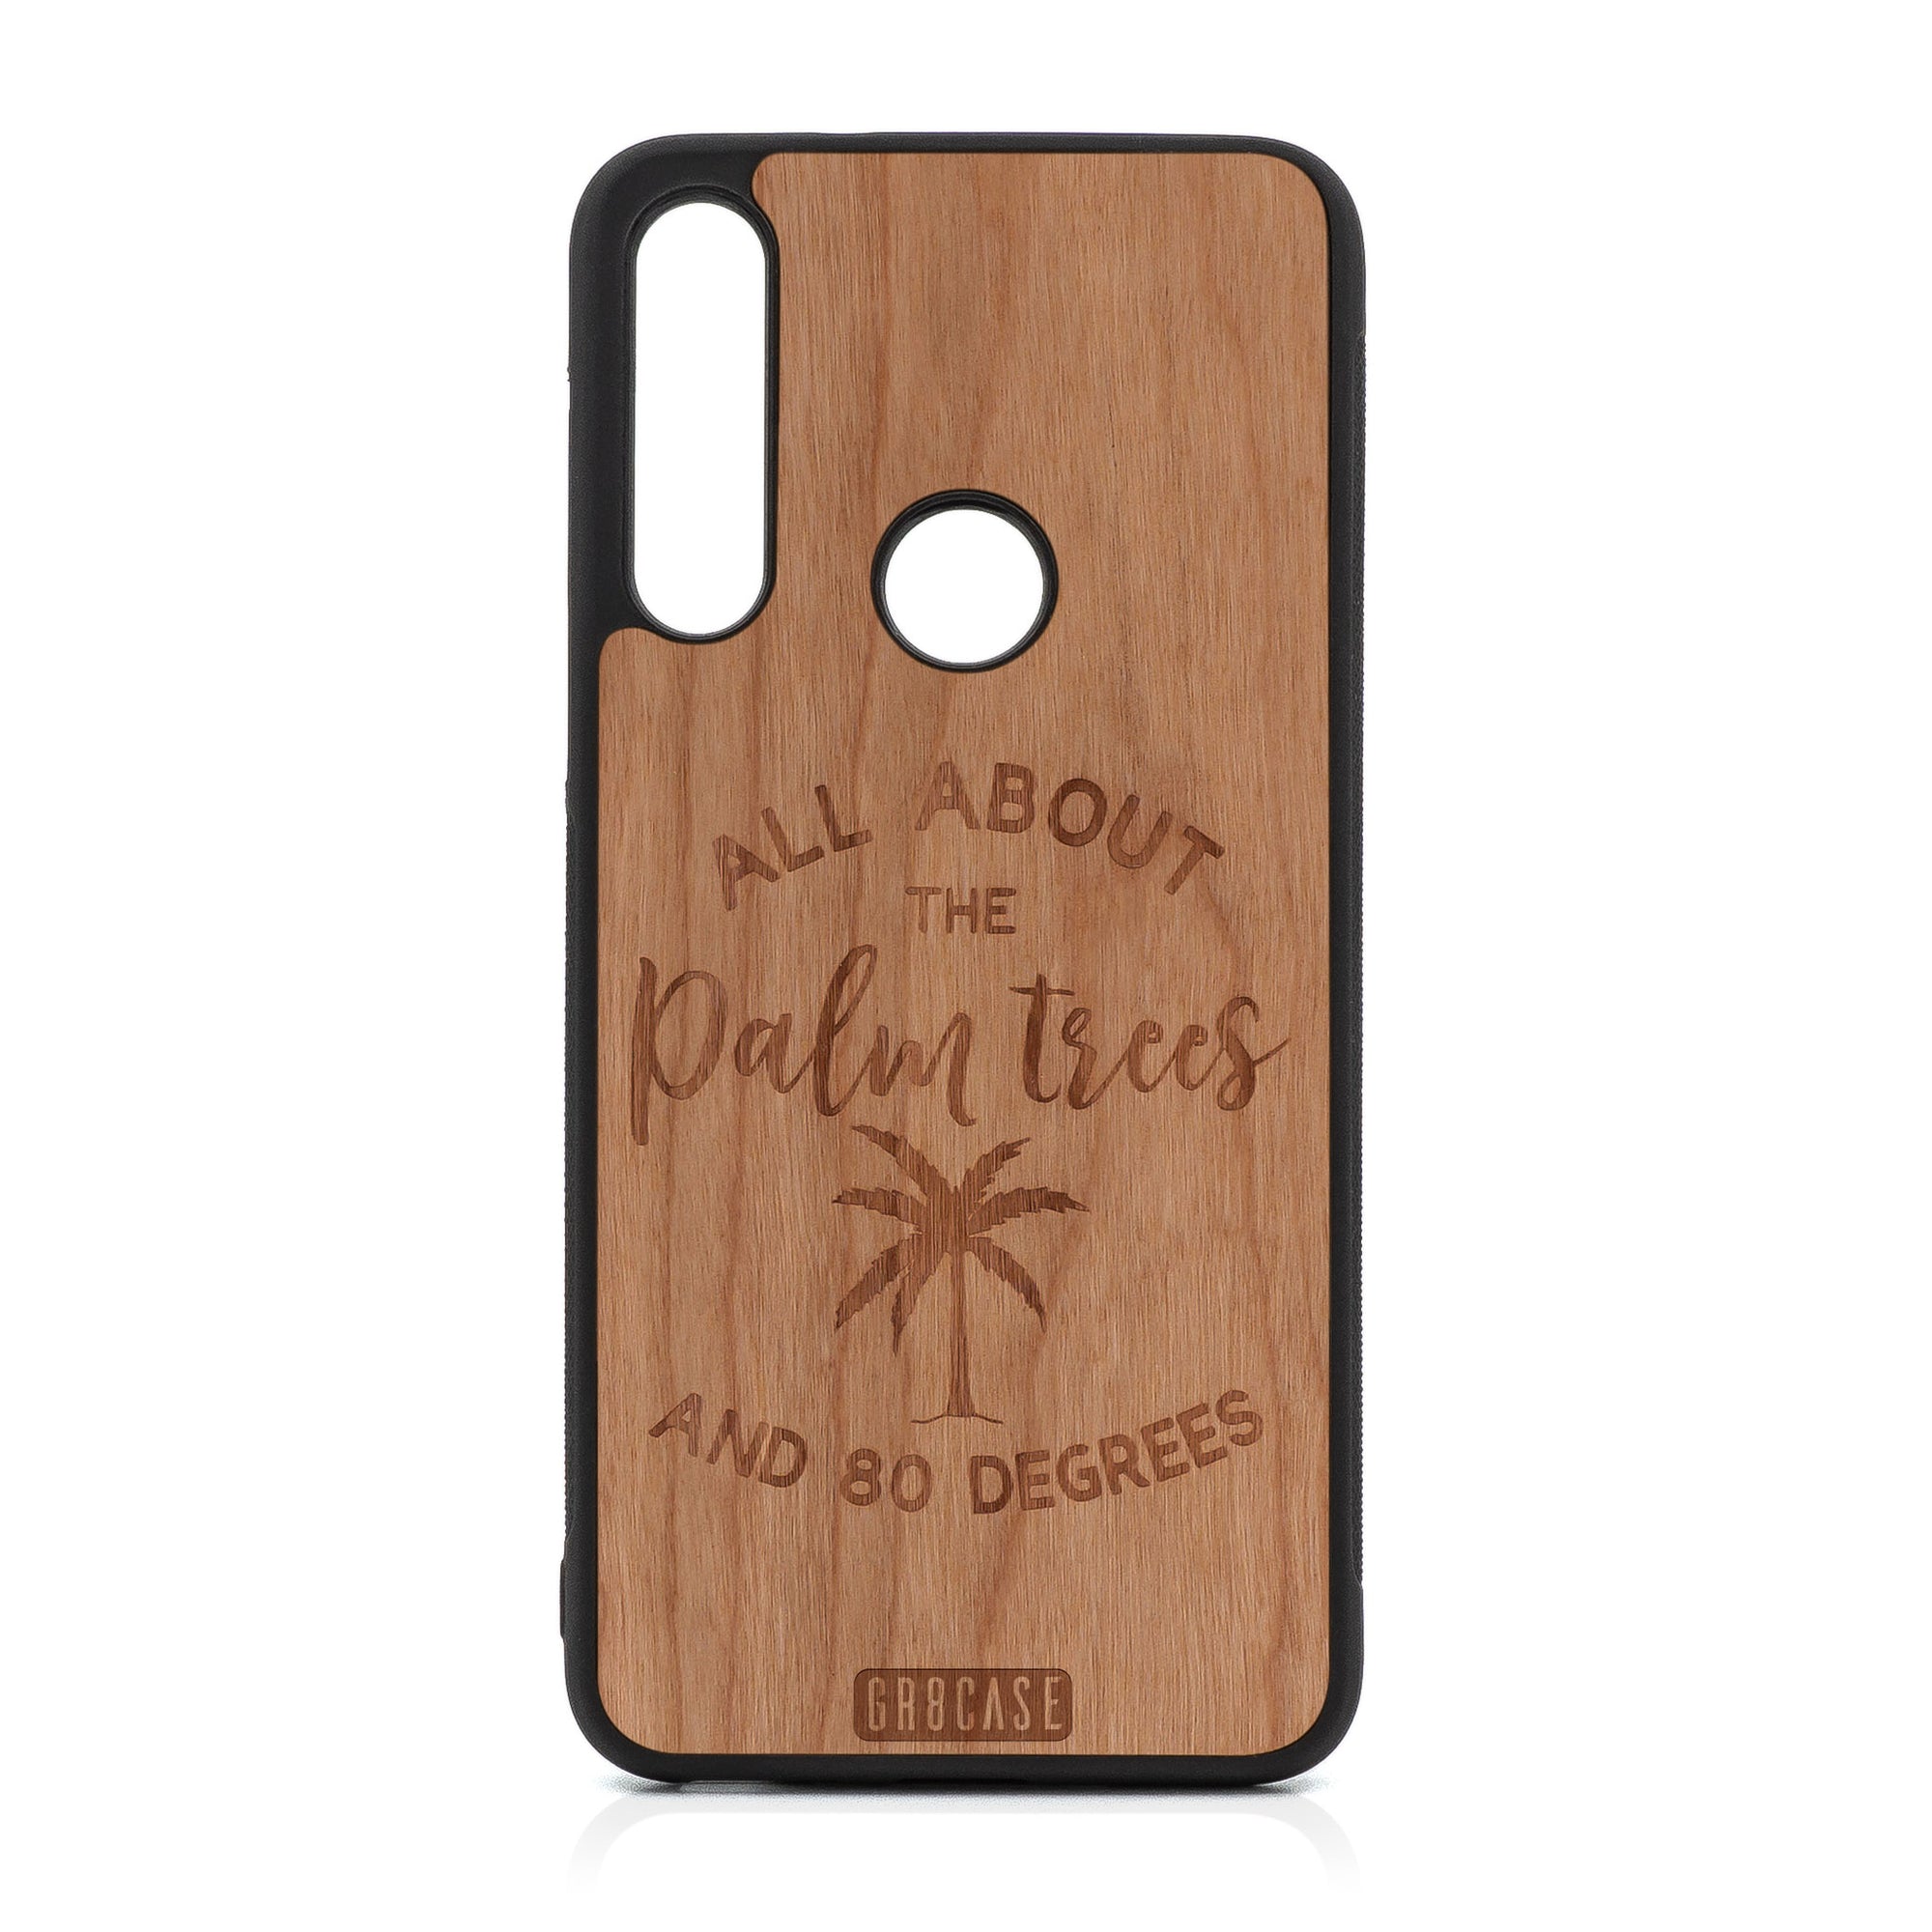 All About The Palm Trees And 80 Degrees Design Wood Case For Moto G Fast